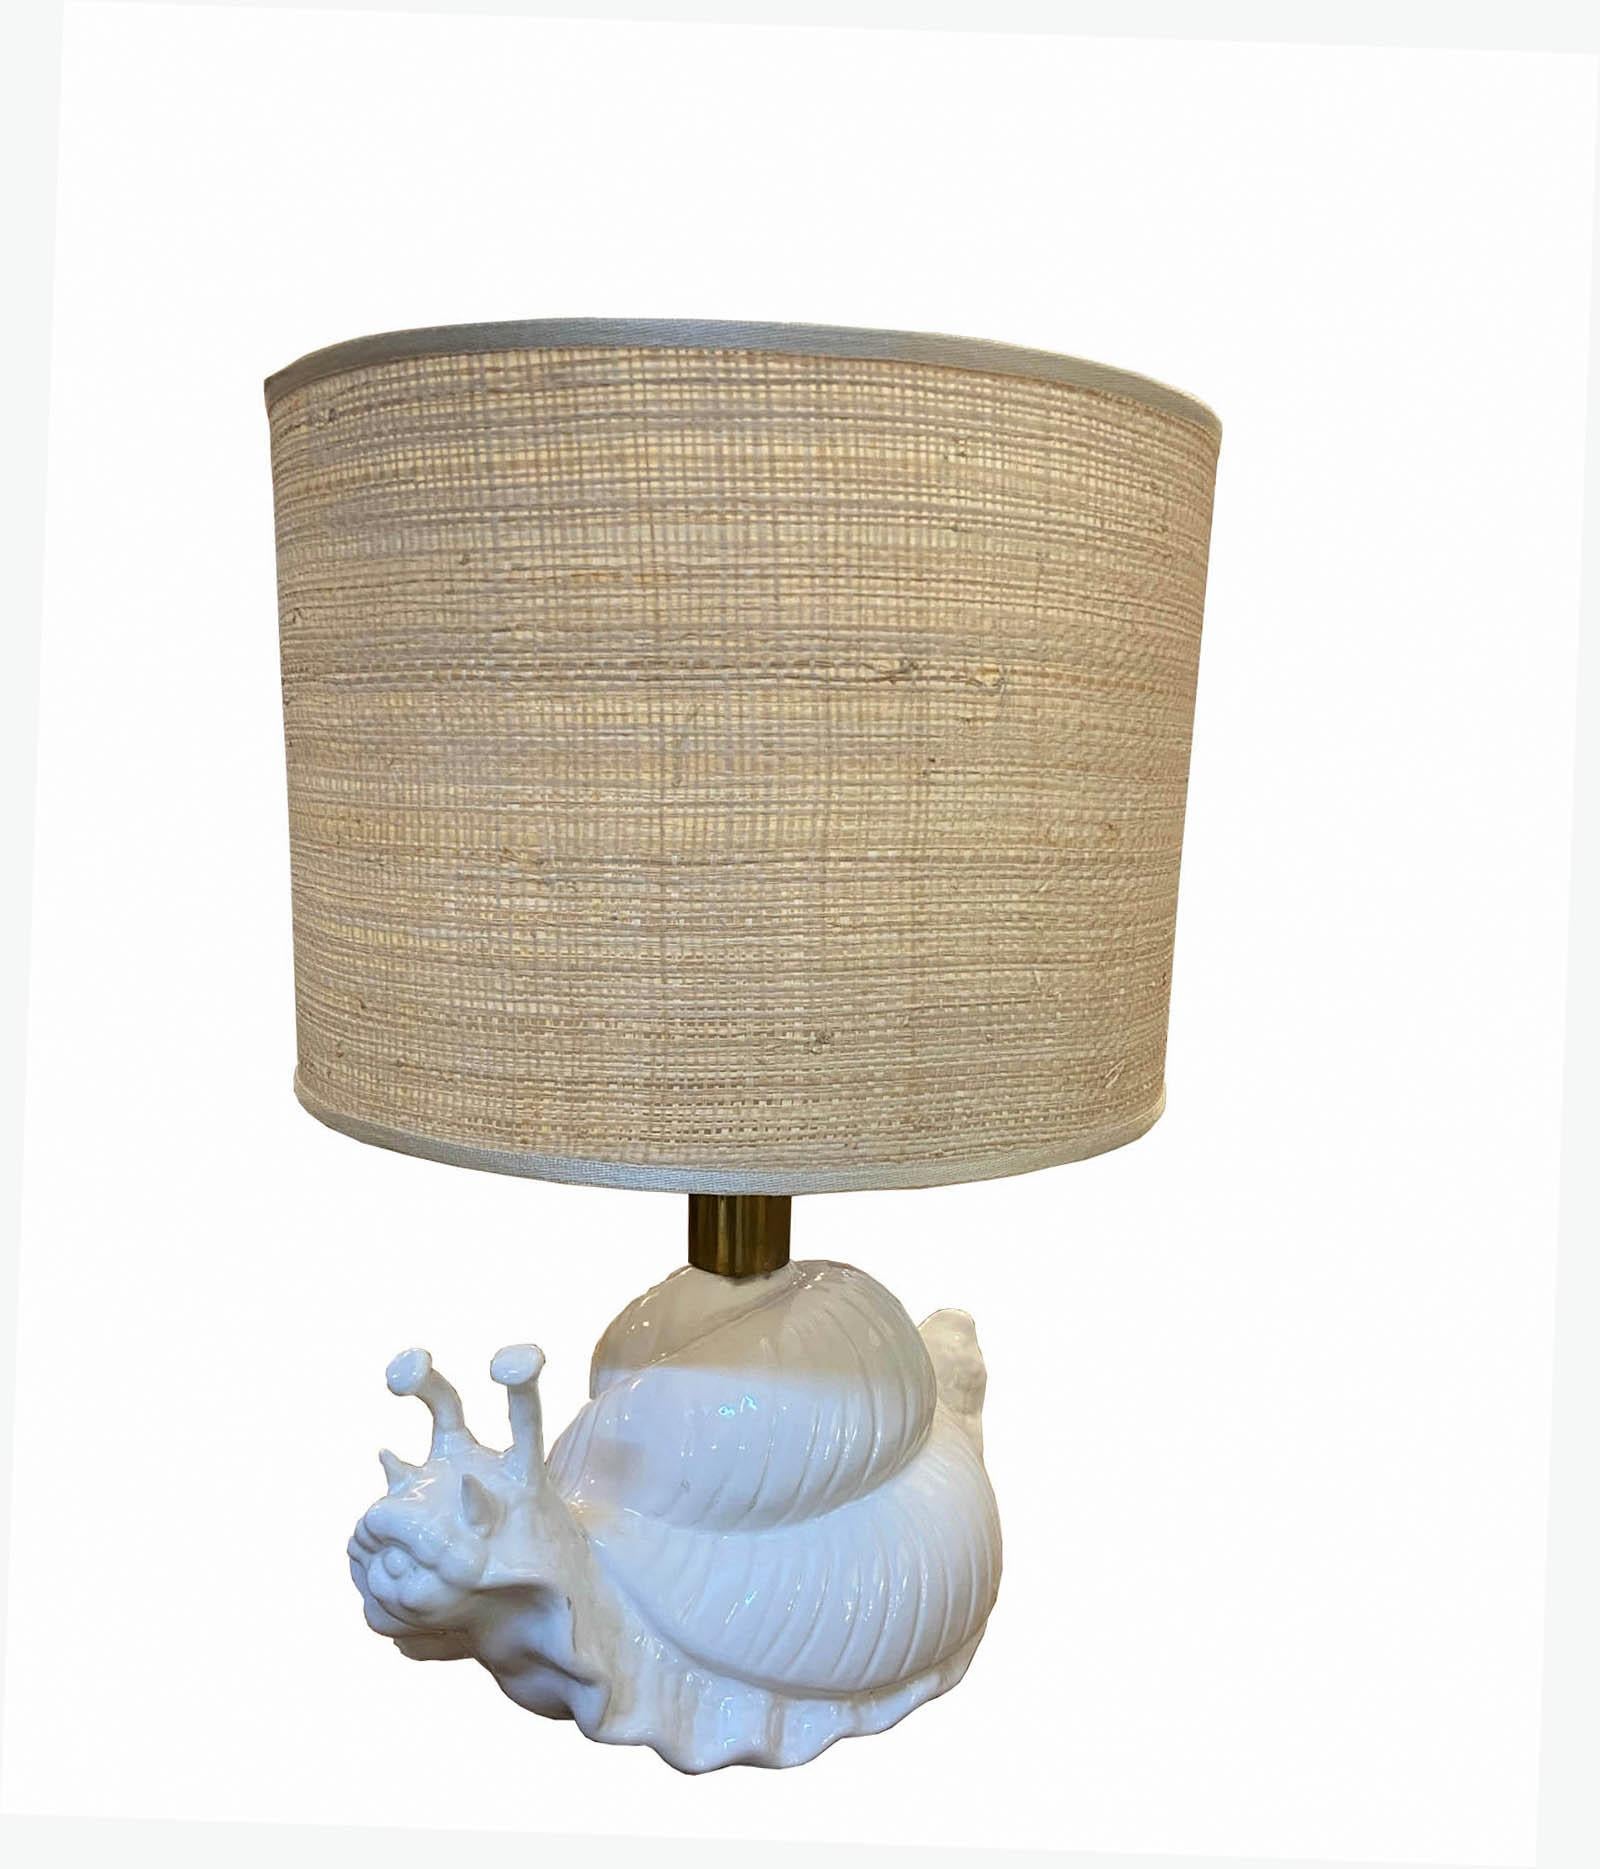 Mid-Century Modern Vivai del Sud Style Ceramic Snail Table Lamp, Italy, 1960s For Sale